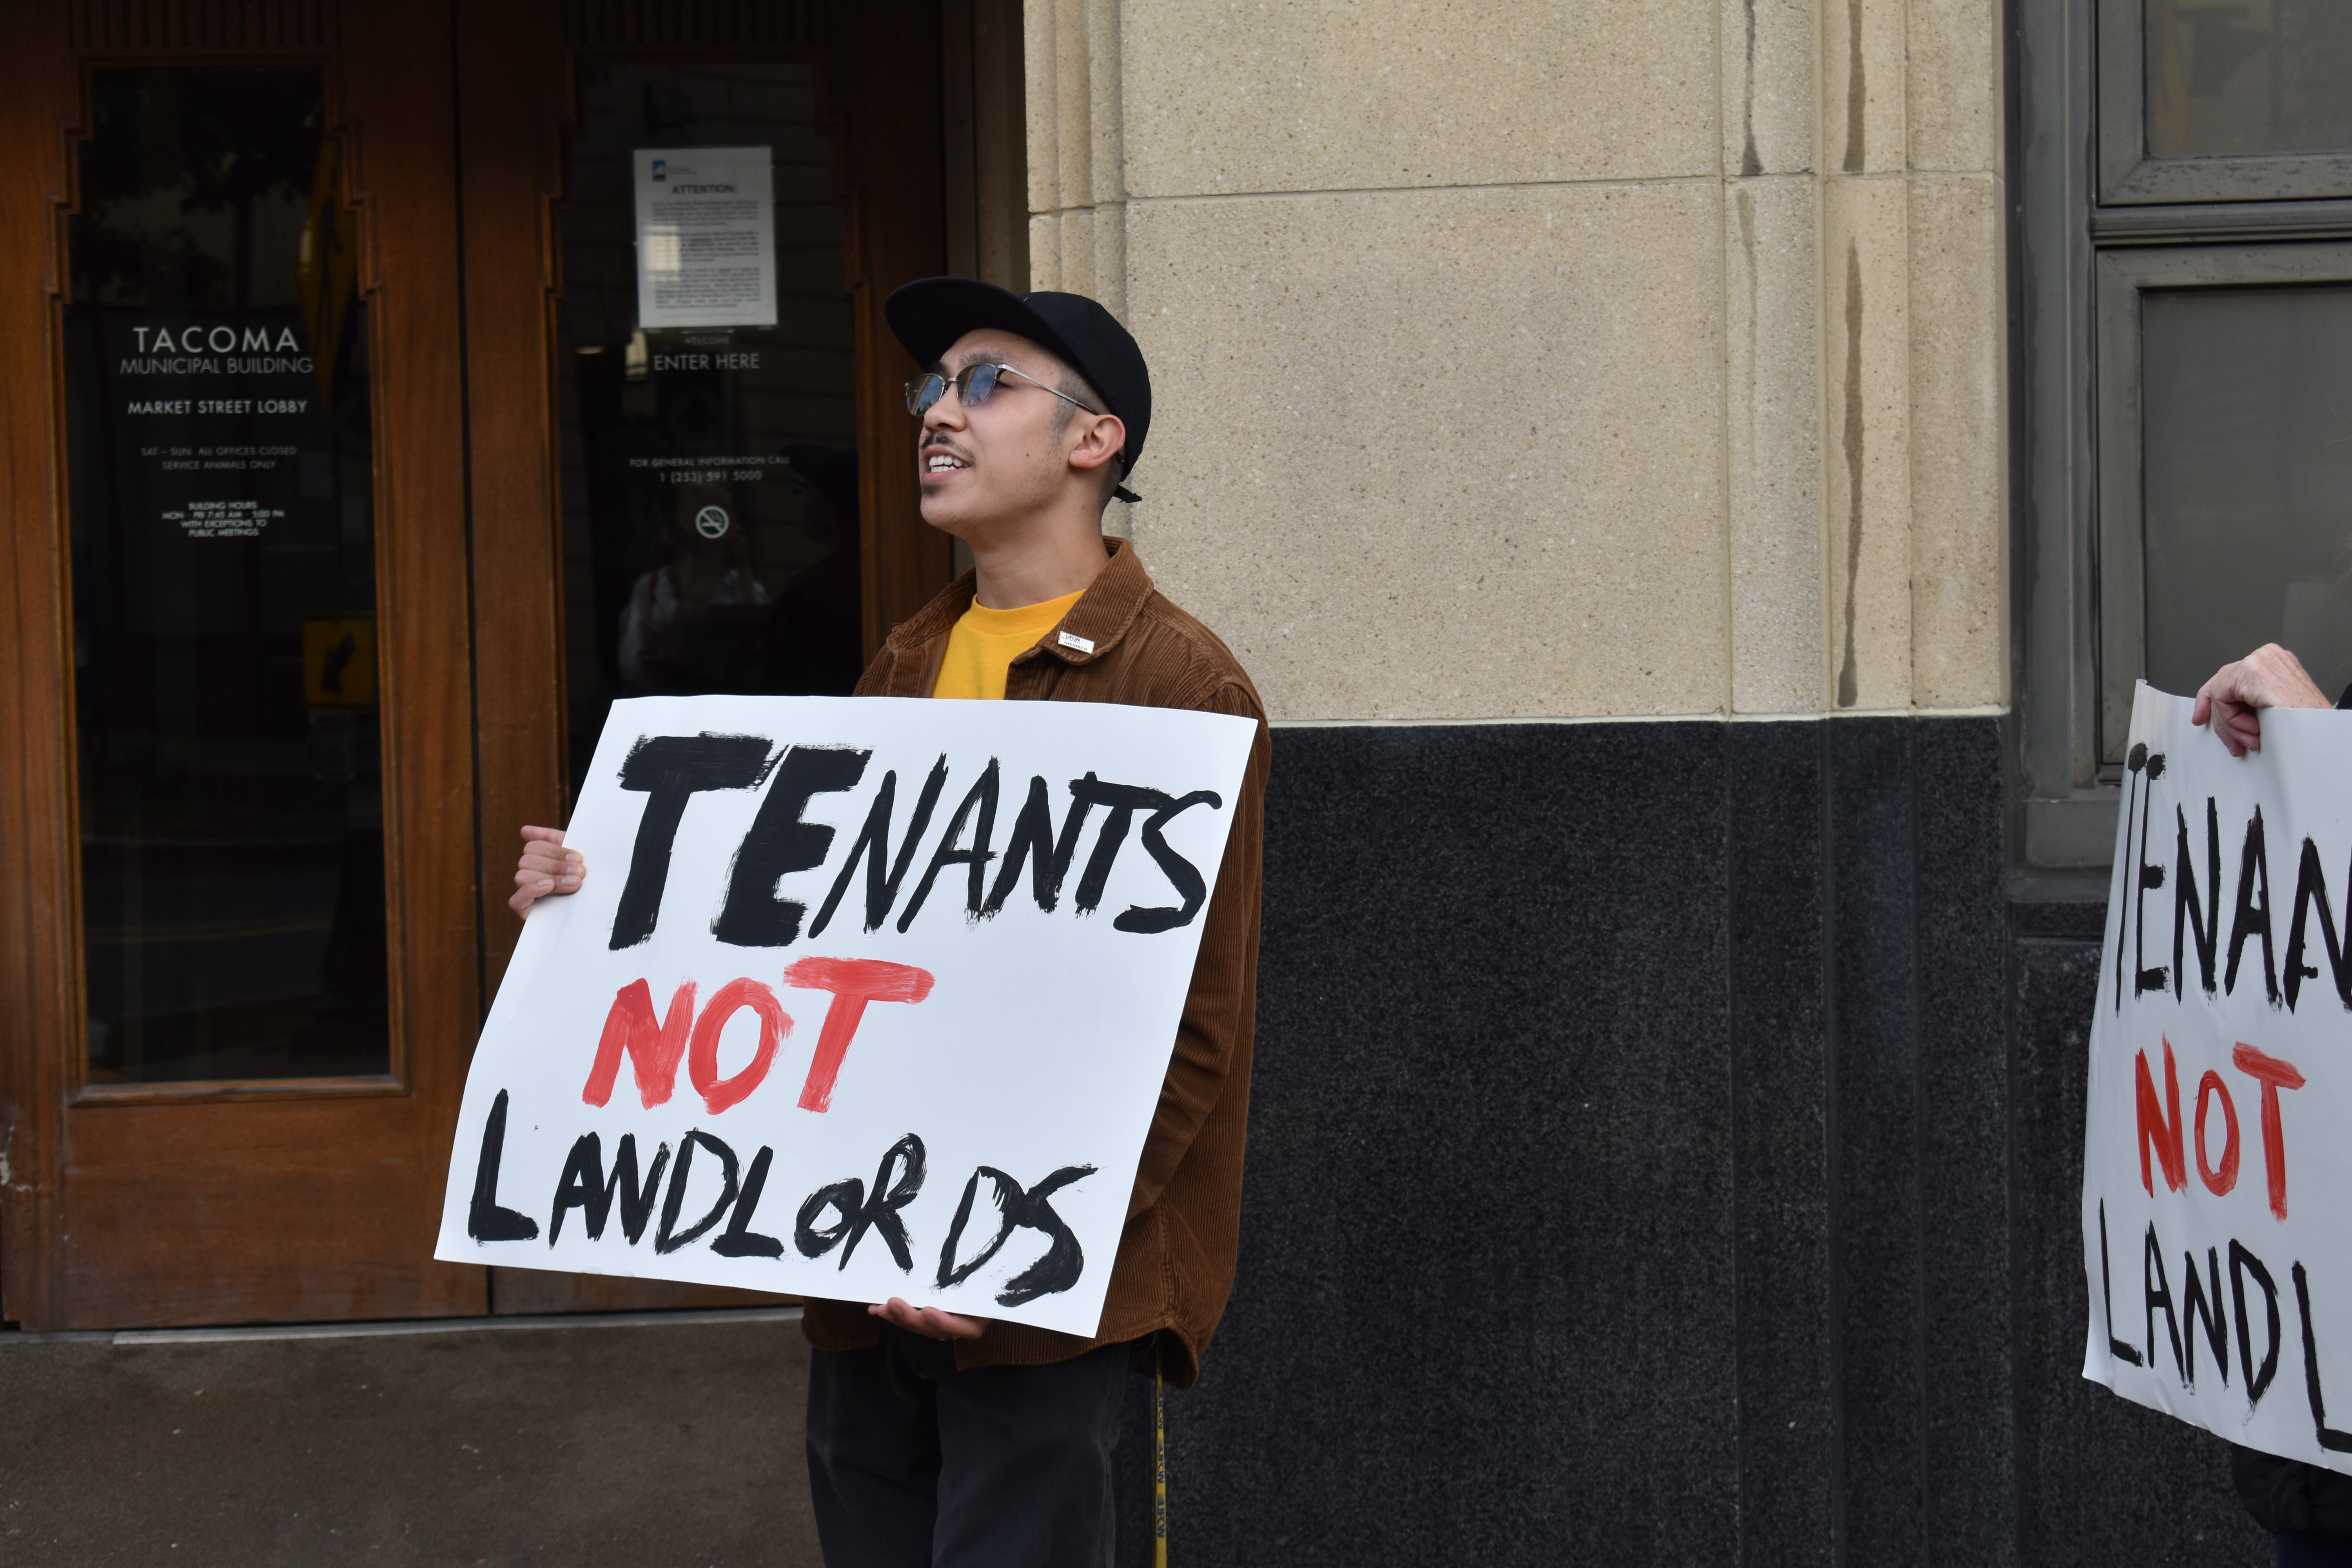 UFCW 367 member Michael Whalen, executive board member of the Pierce County Central Labor Council, holds a sign that reads "Tenants Not Landlords," at Tuesday's protest. Photo by Lauren Gallup.